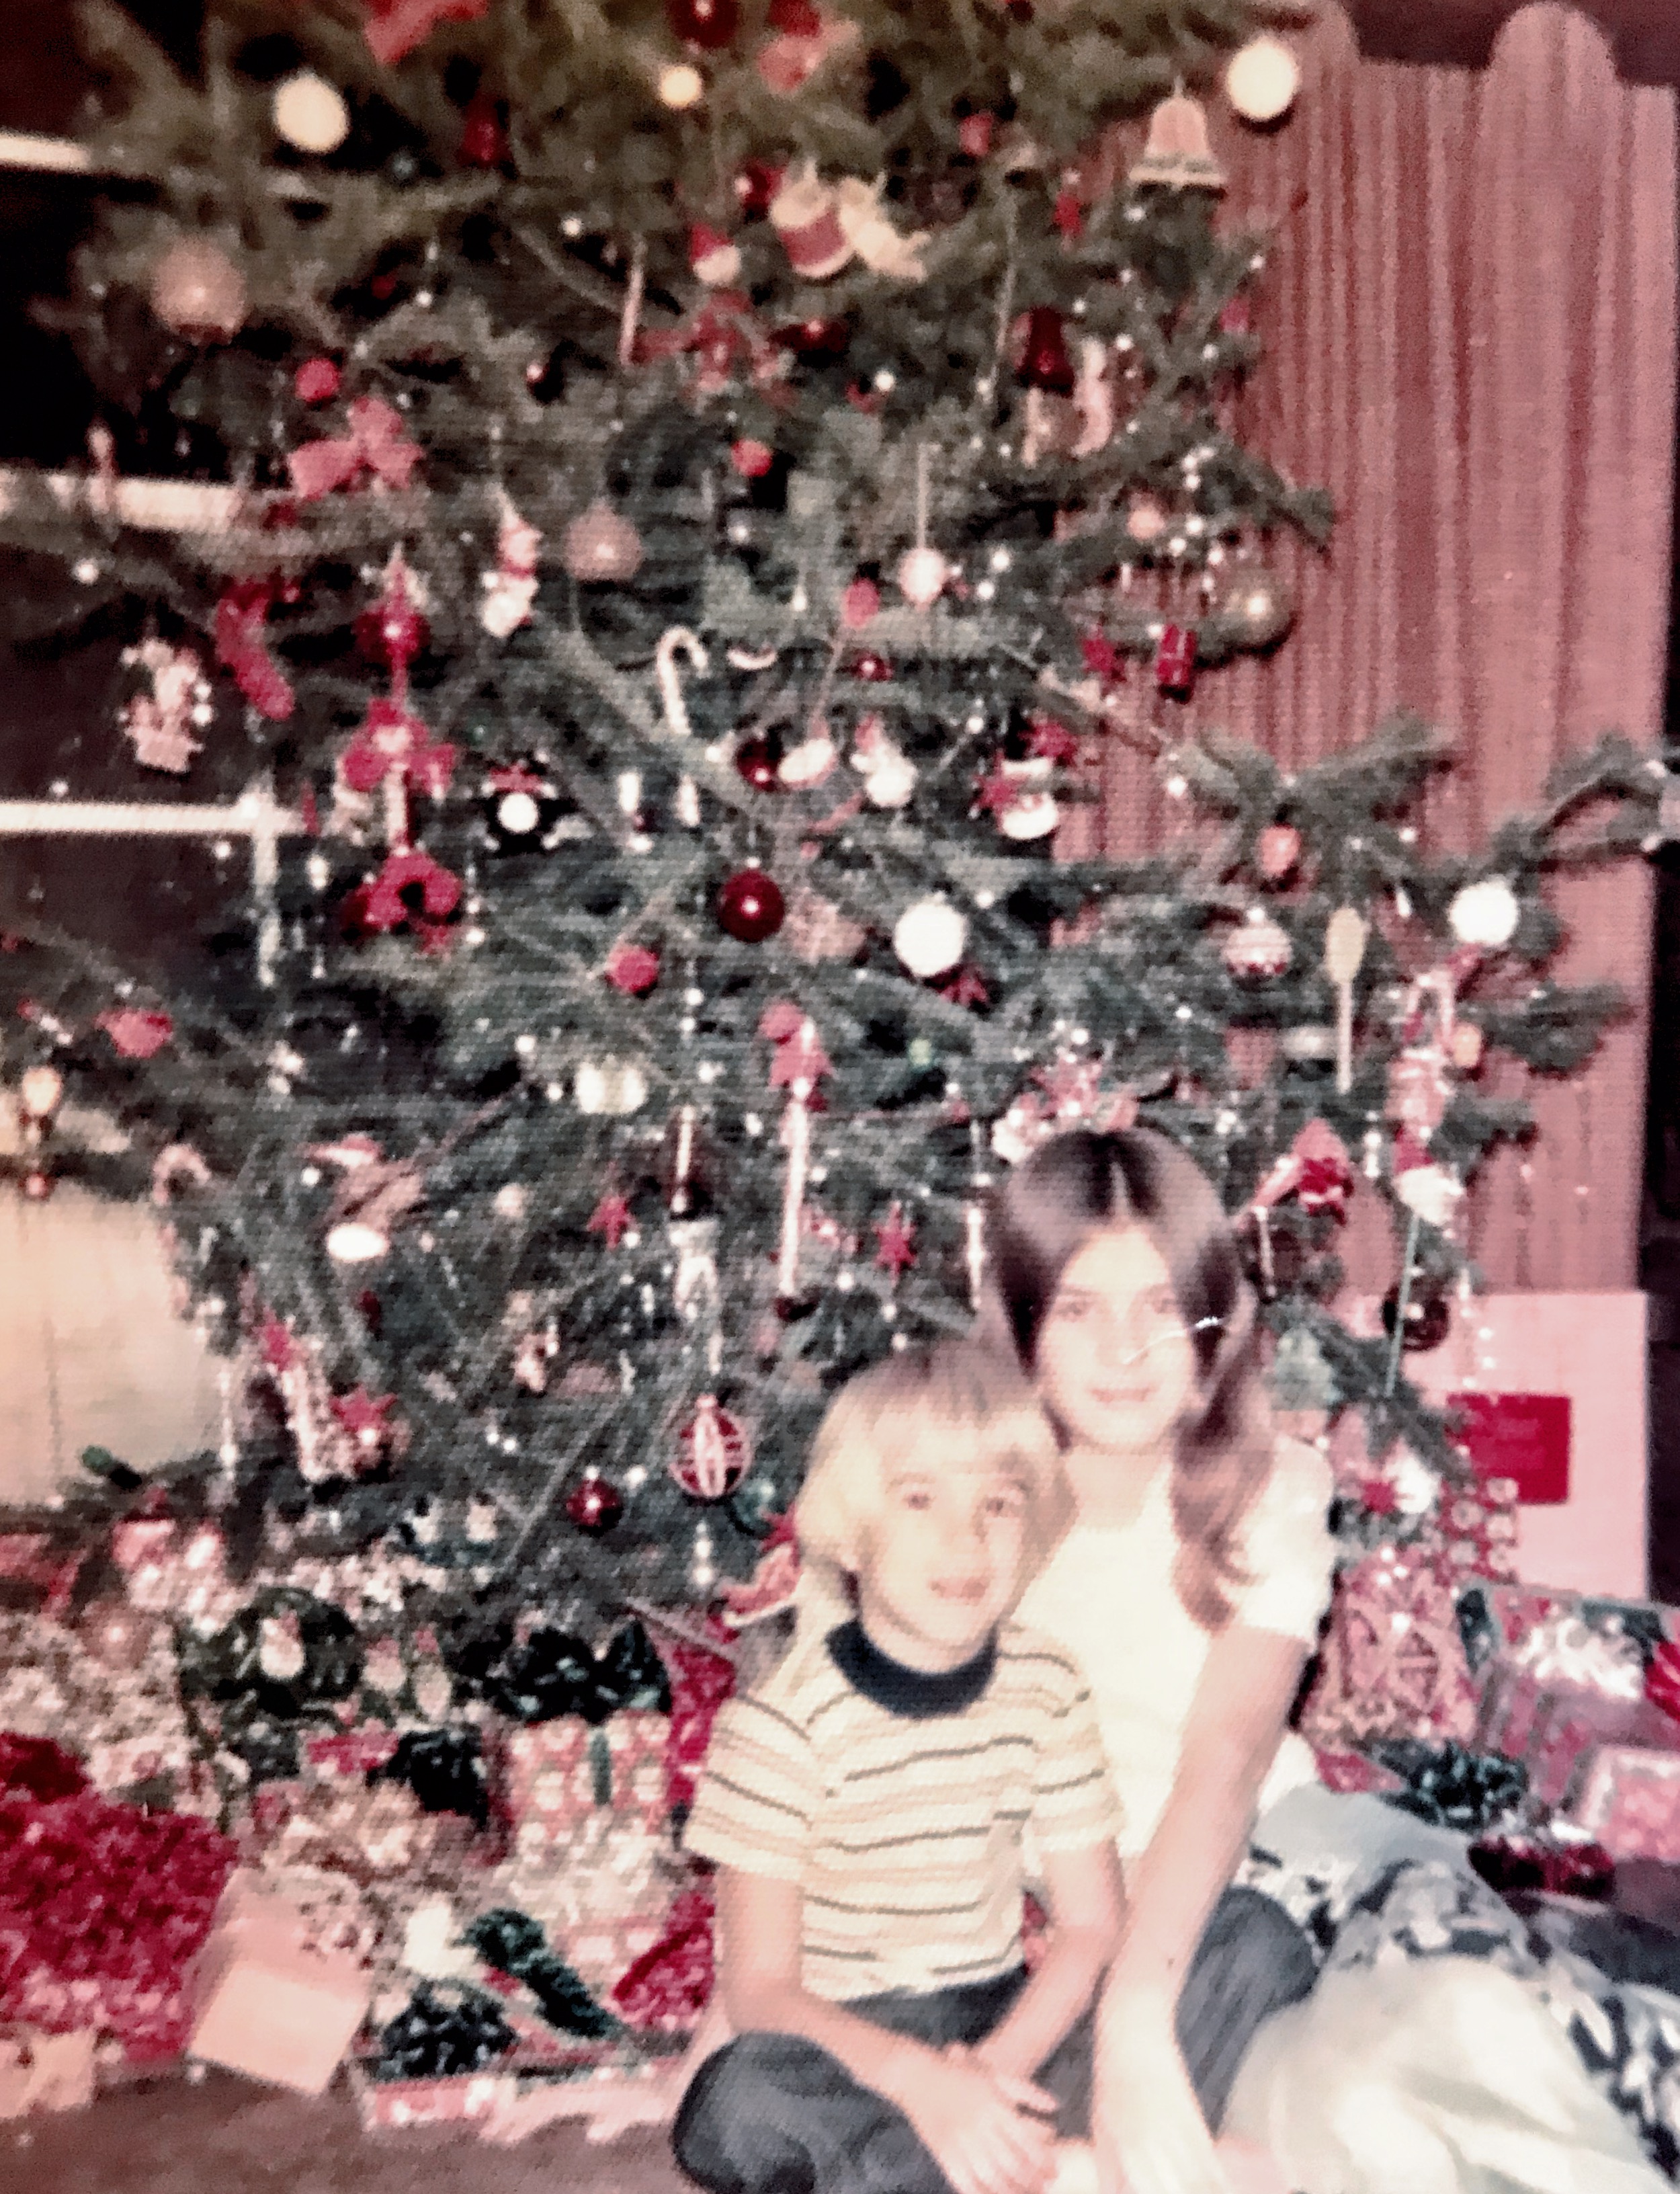 Christmas
John and Kelly
About 1974
